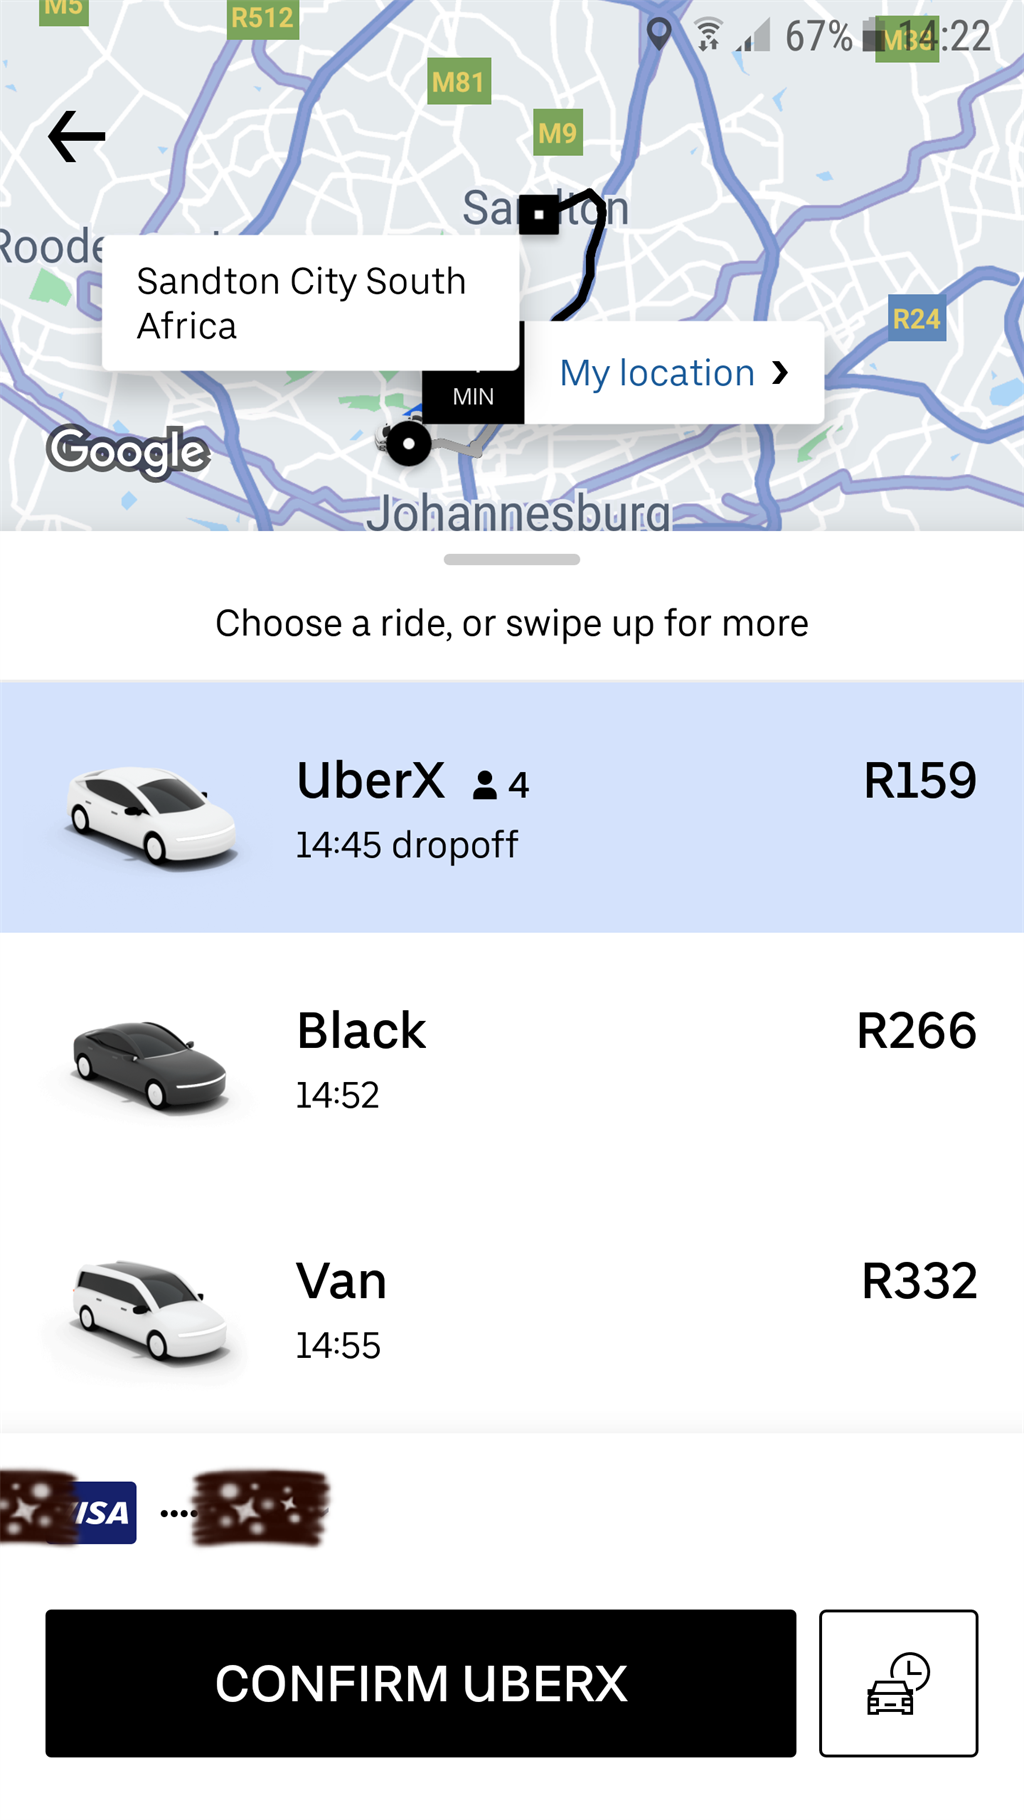 Yookoo Rider, Uber, InDriver, Taxify, Bolt